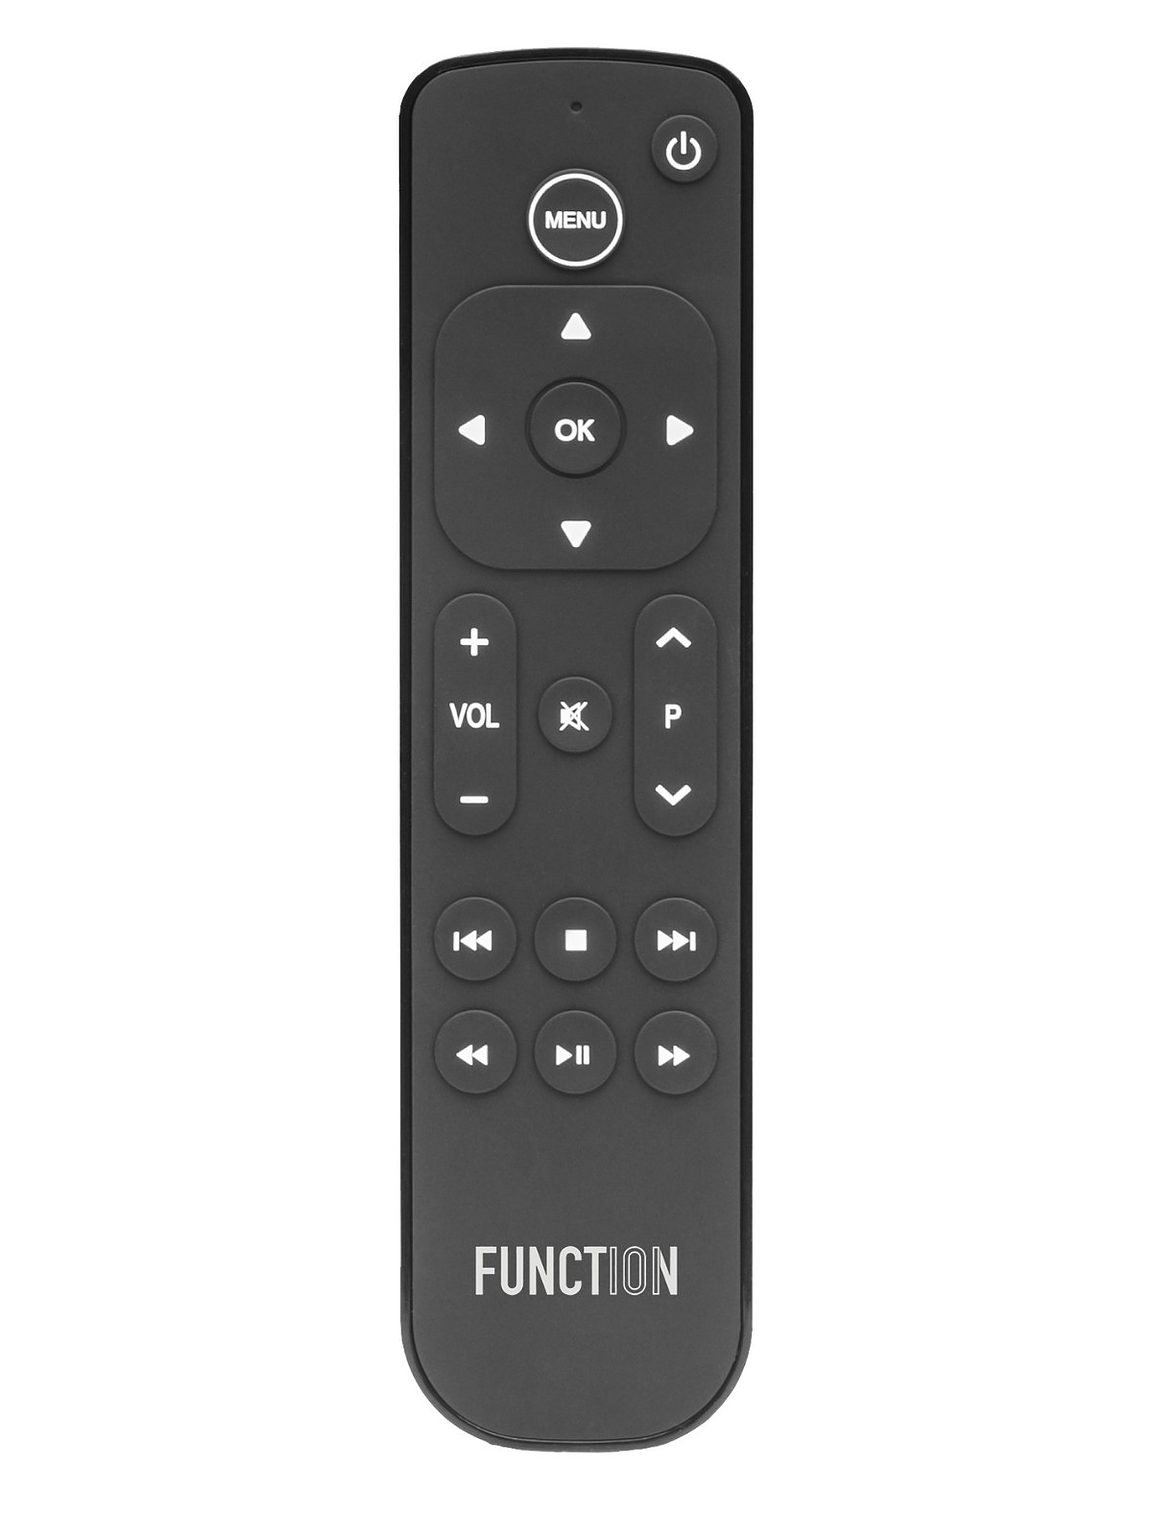 Giveaway: The Function101 Button Remote offers a user-friendly alternative to the Siri Remote.